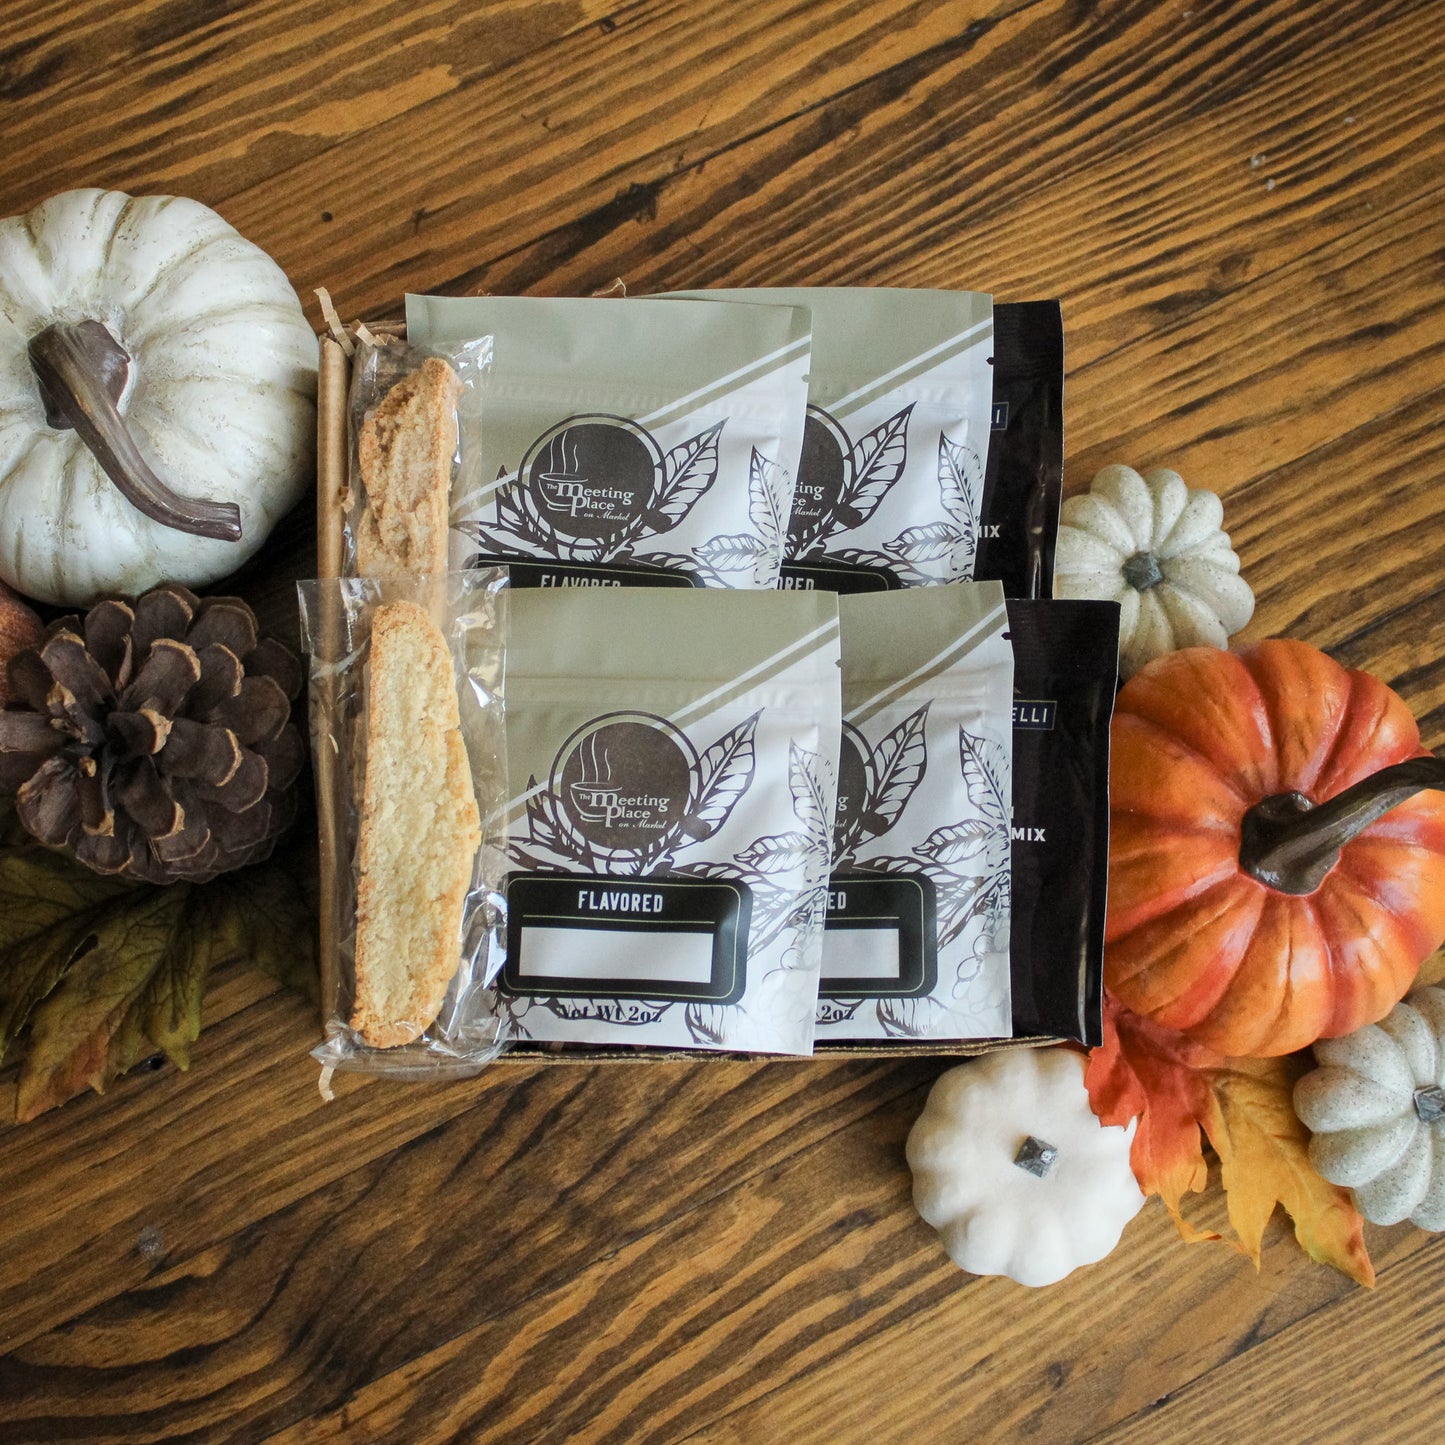 Fall Holiday Coffee Sampler Gift Box, Thanksgiving Gift Basket, Pumpkin Spice Coffee Fall / Autumn Gifts - The Meeting Place on Market